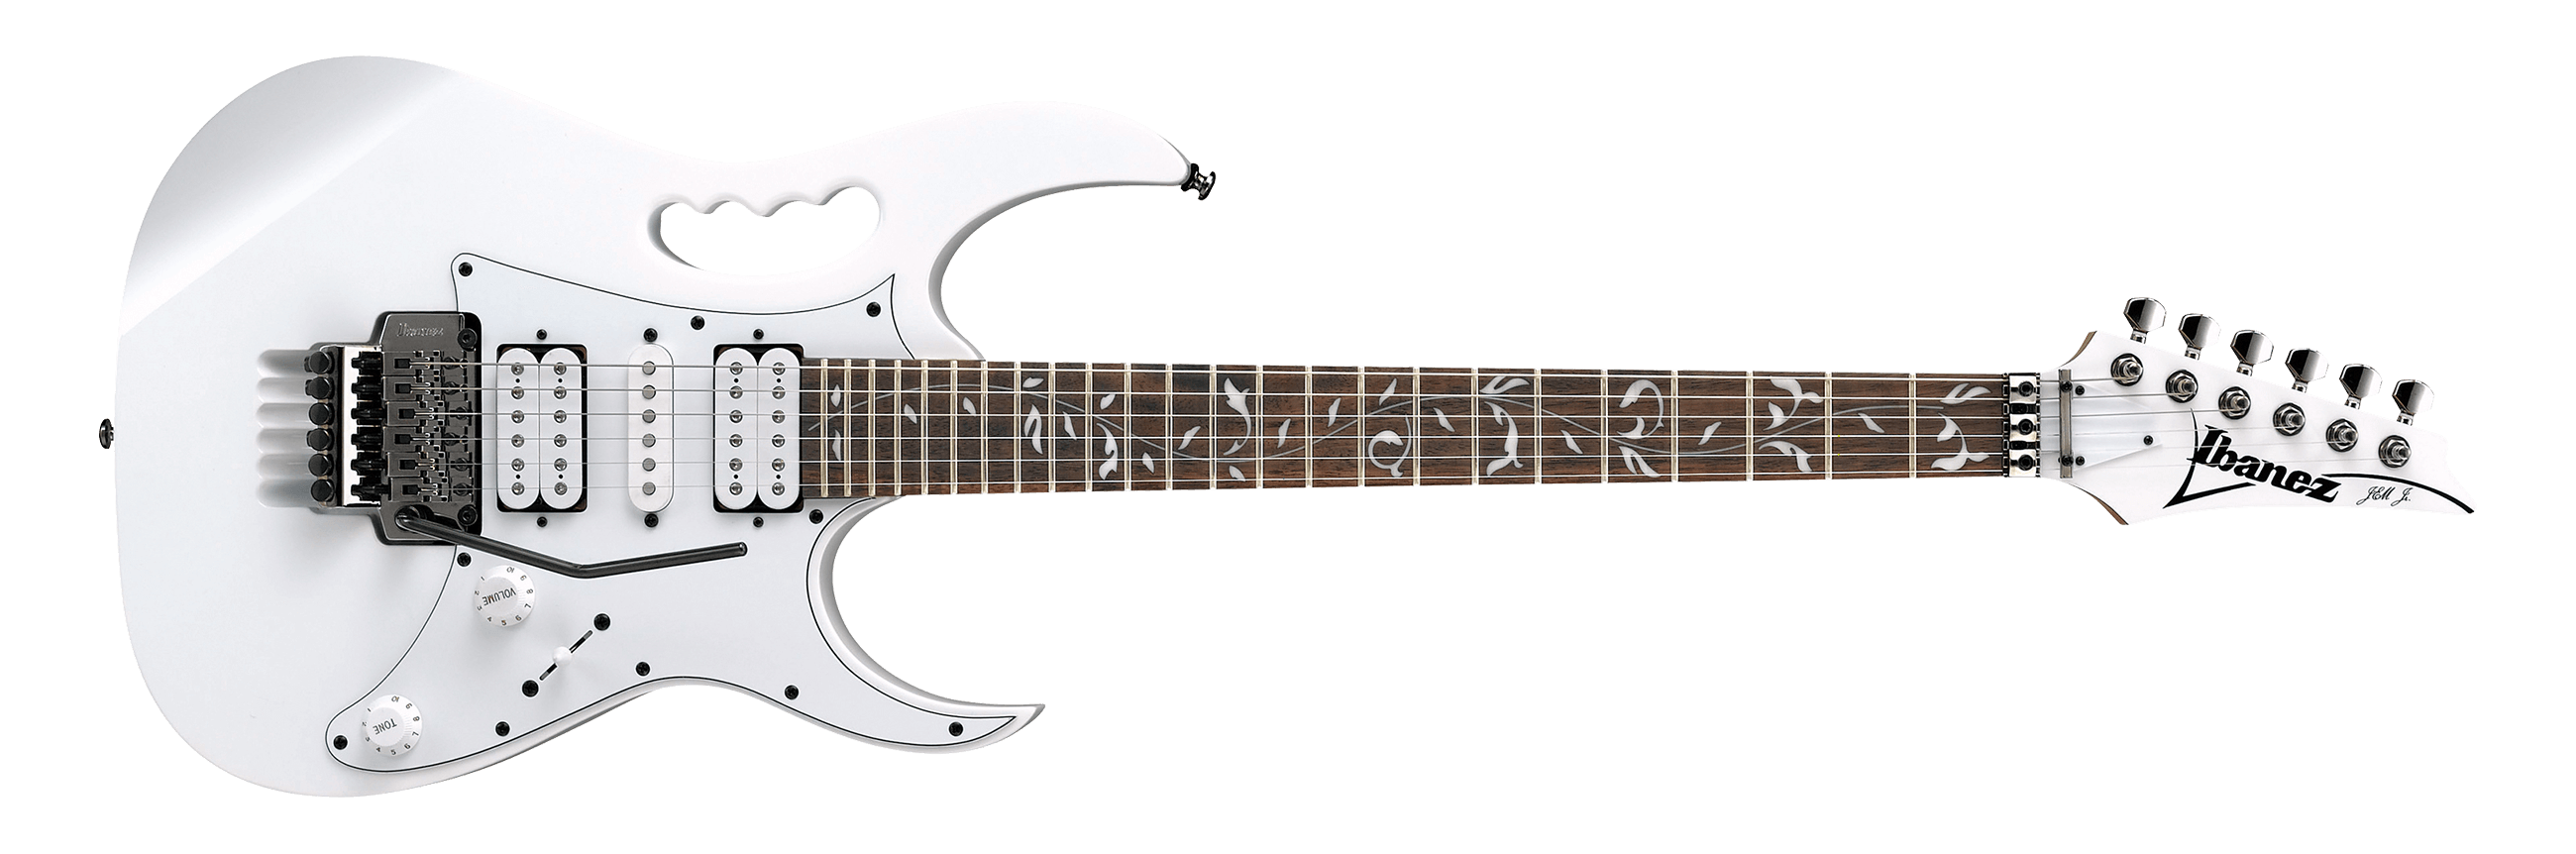 Ibanez Steve Vai JEMJR-WH Right Handed 6 String Electric Guitar - White